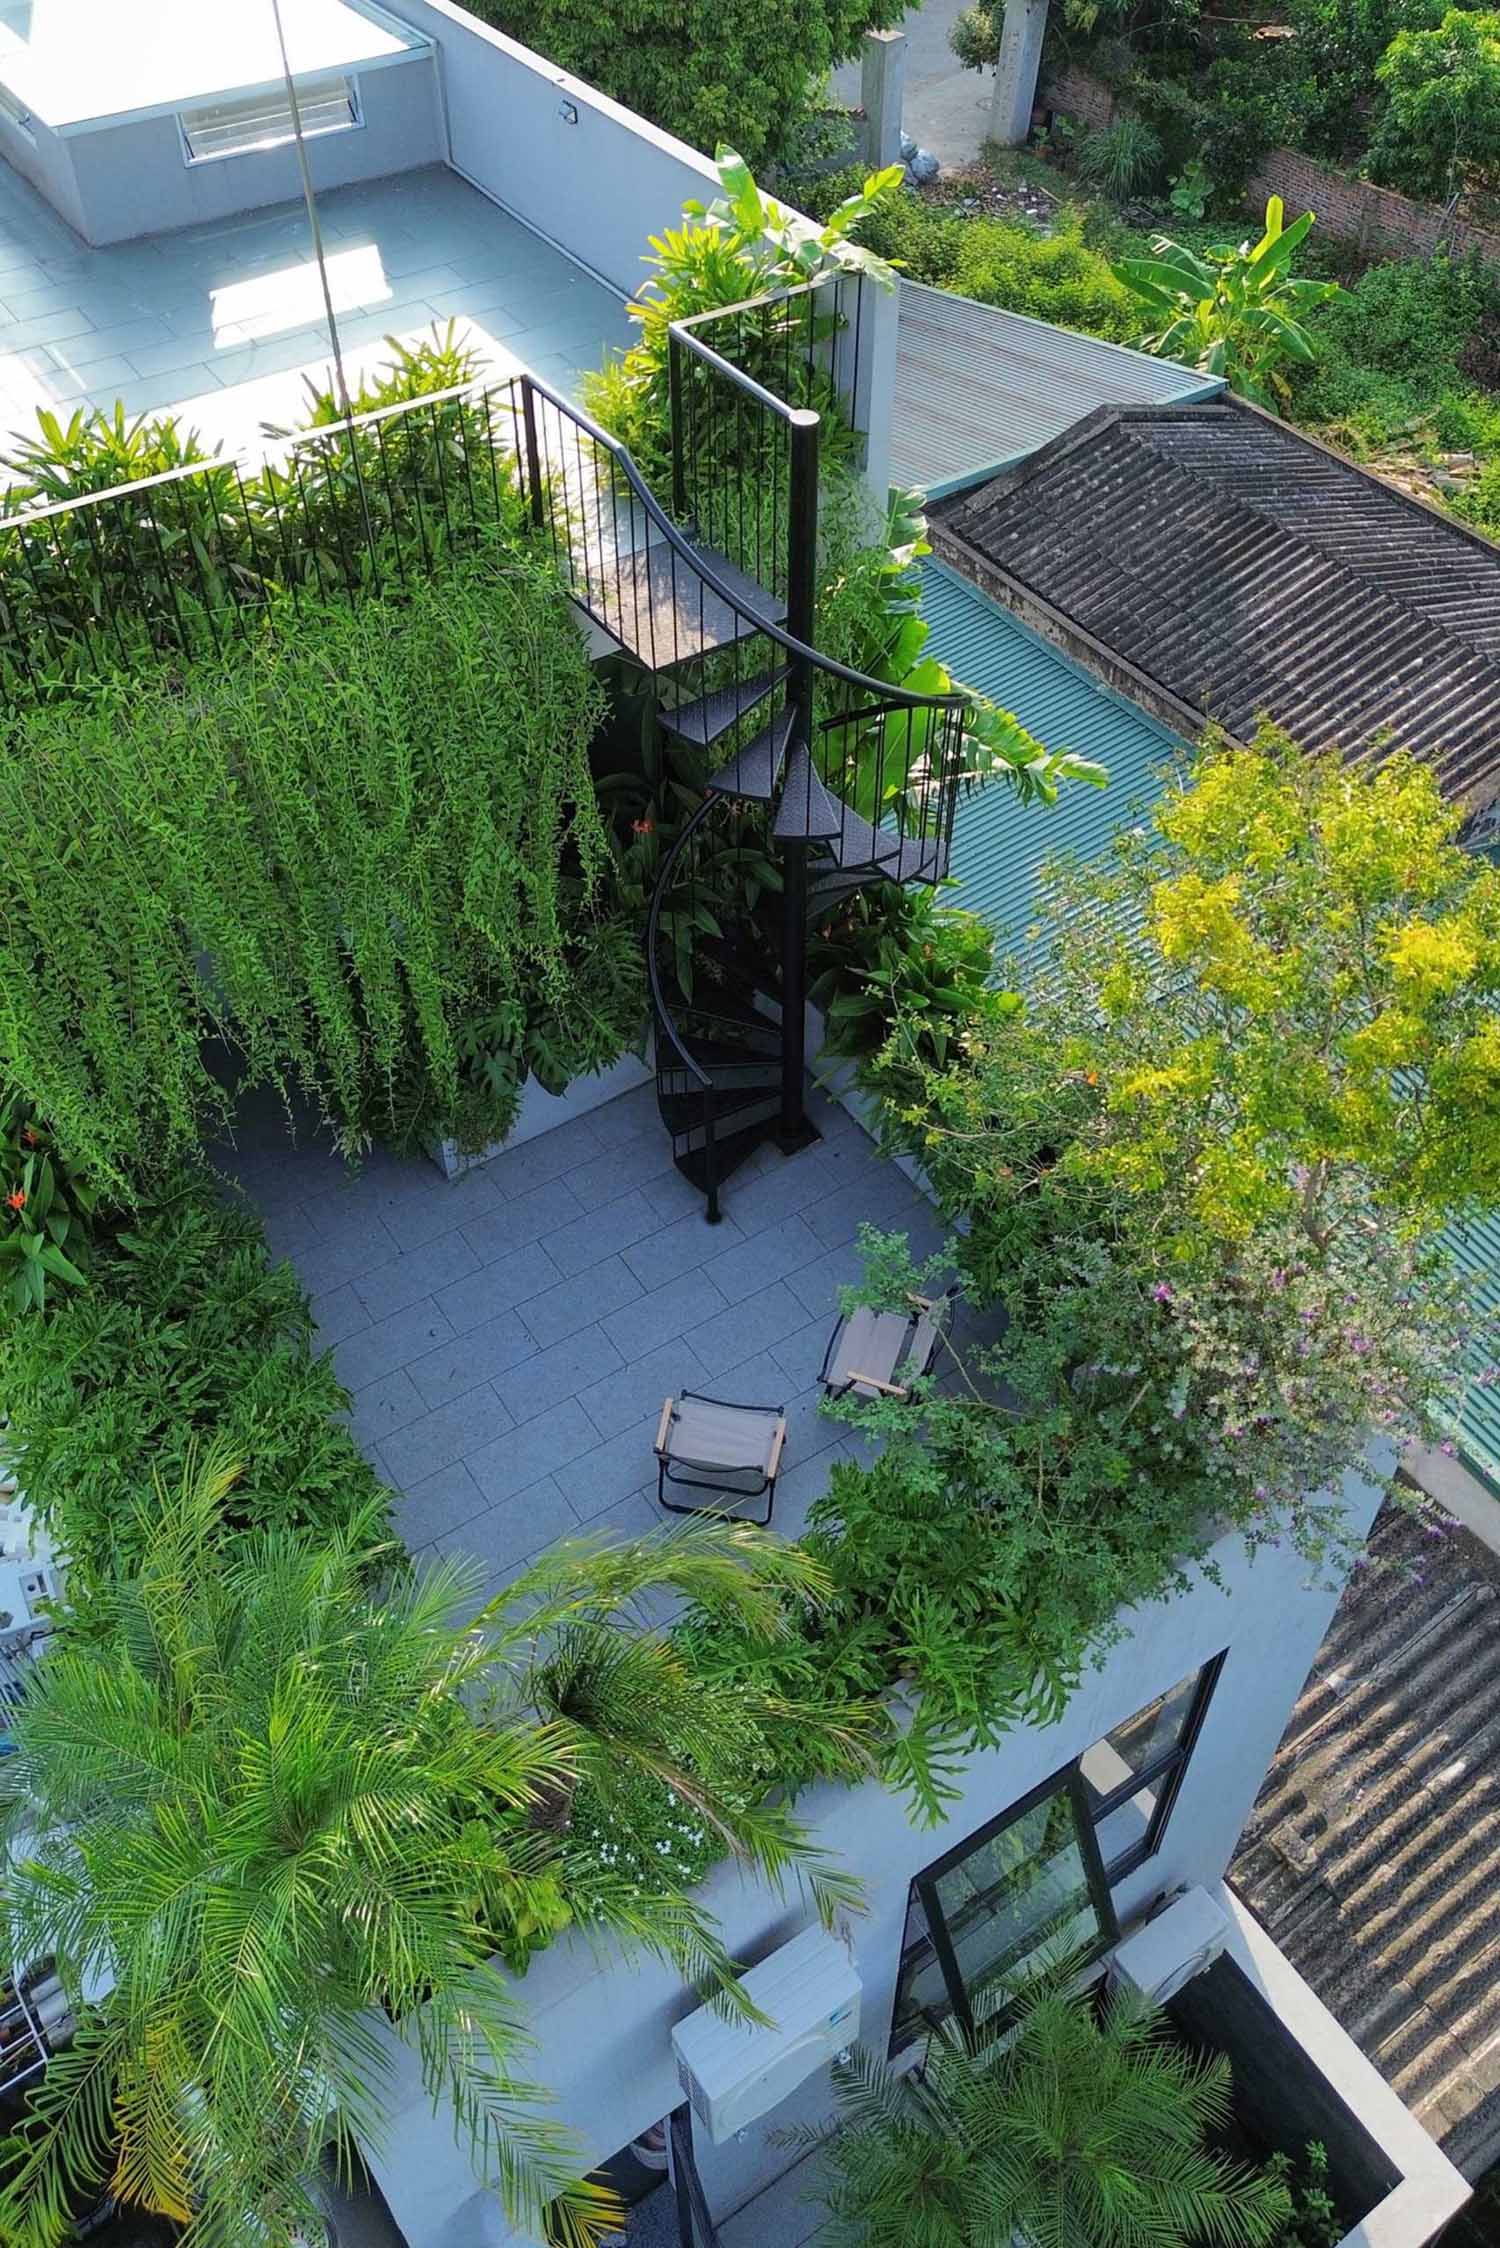 A modern rooftop patio with seating and spiral stairs that lead to an additional rooftop area with a pergola and more plants.